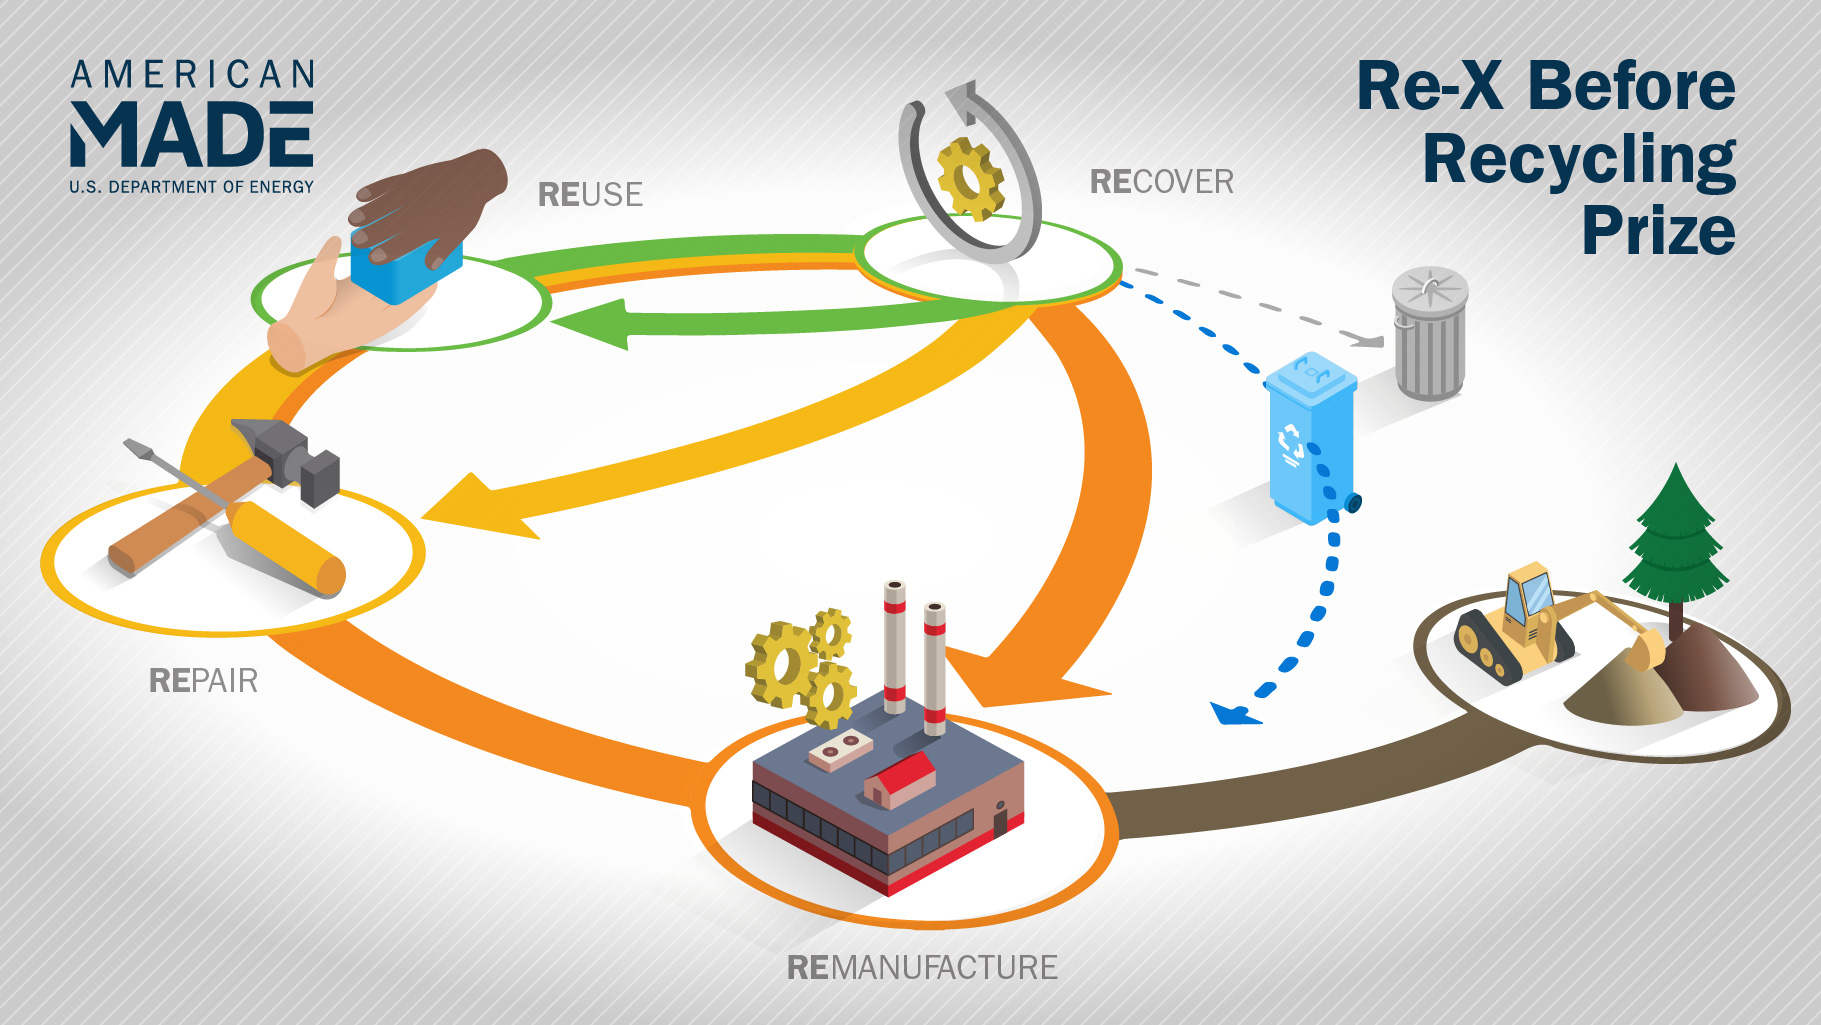 A graphic depicts meaning of "Re-X" as it is used by the U.S. Department of Energy. 